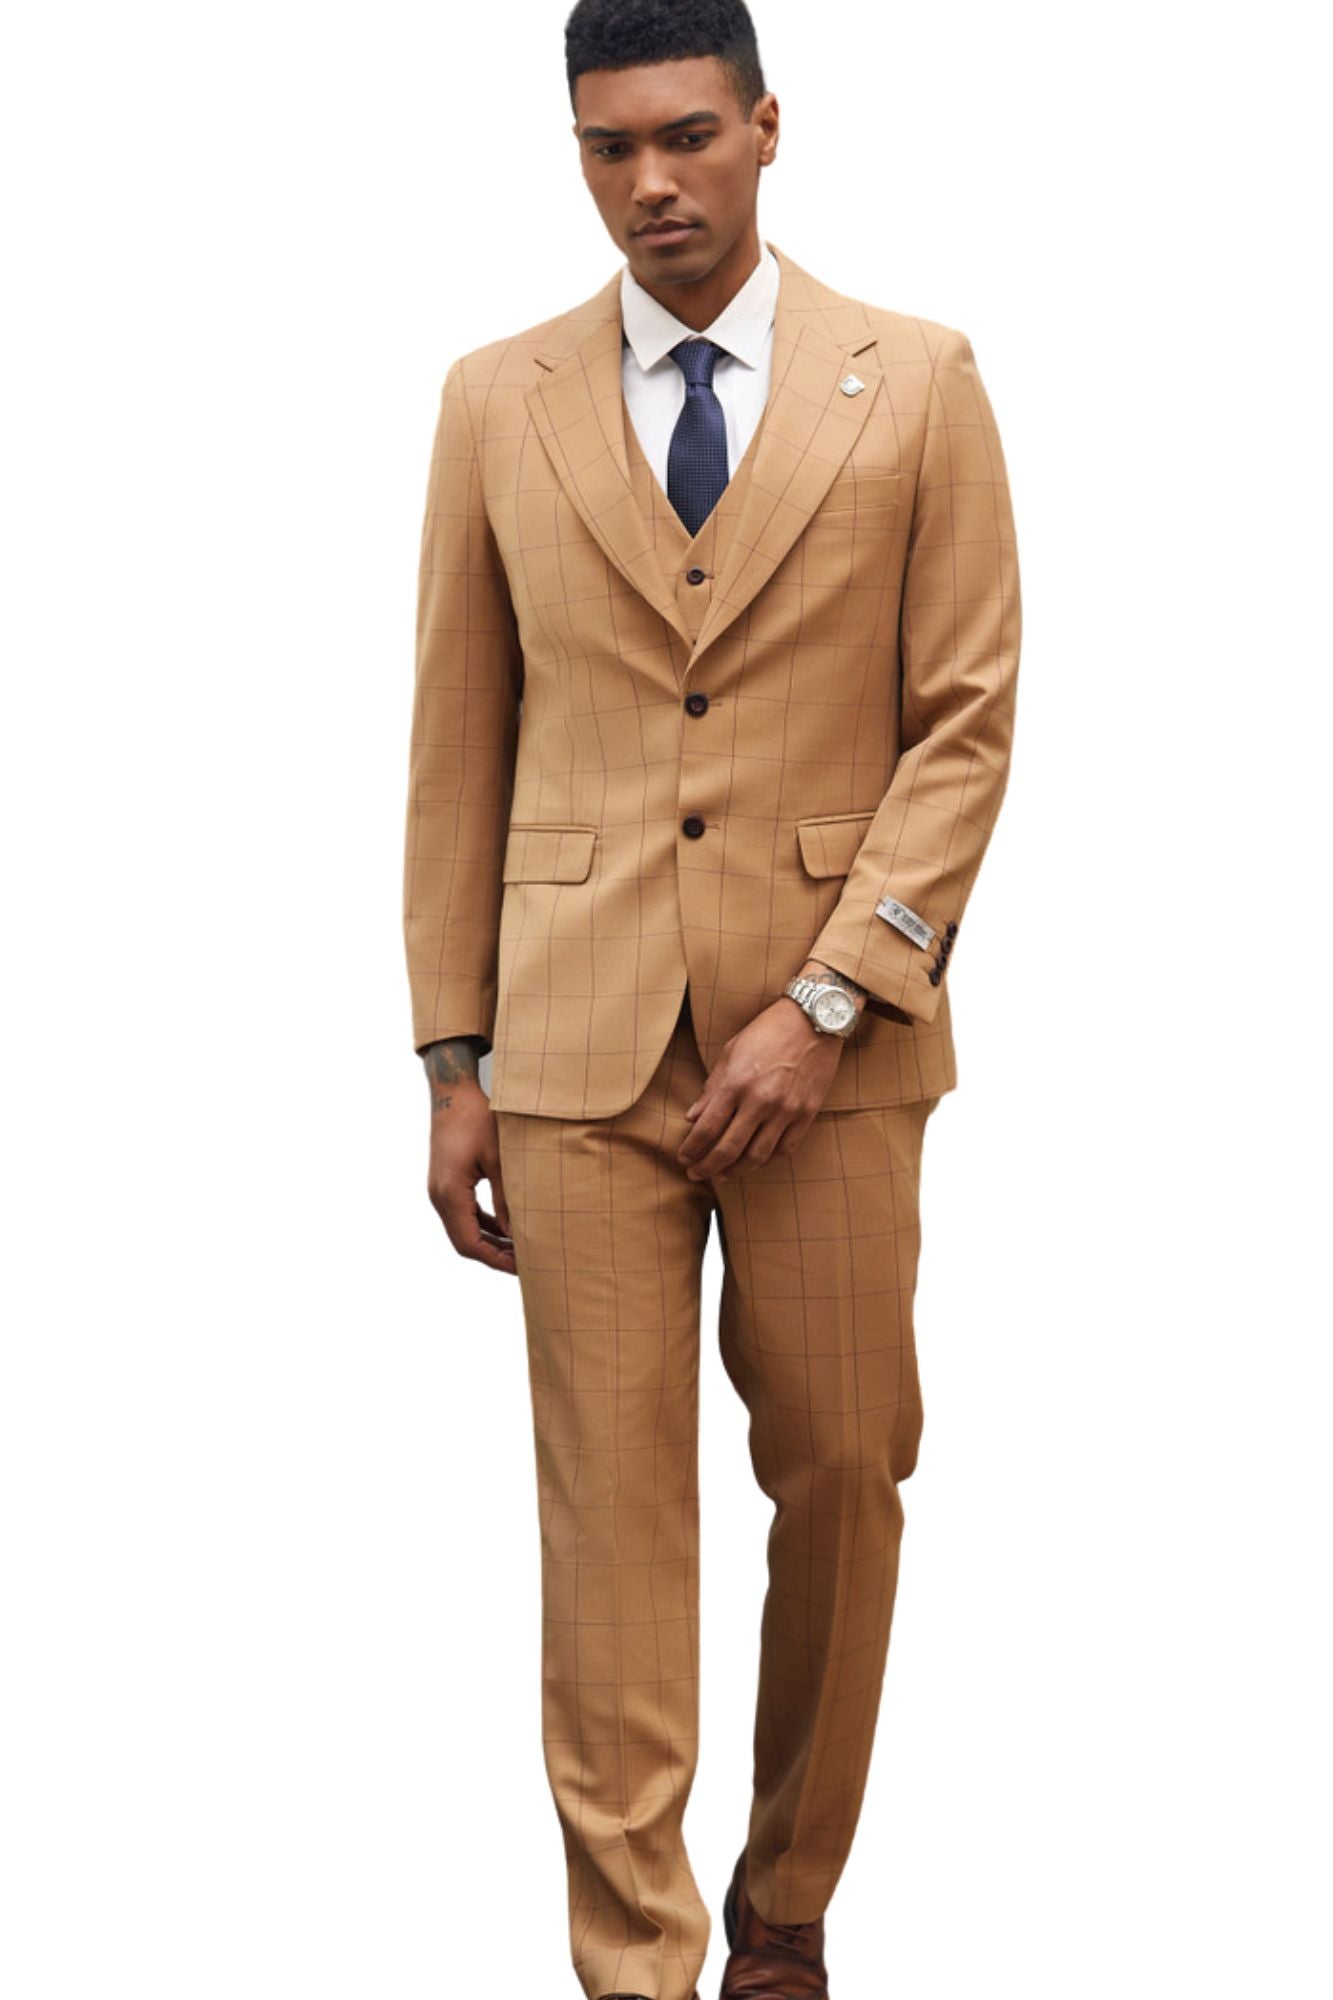 Men's Suits & Clothing Store  Suits and More – Suits & More